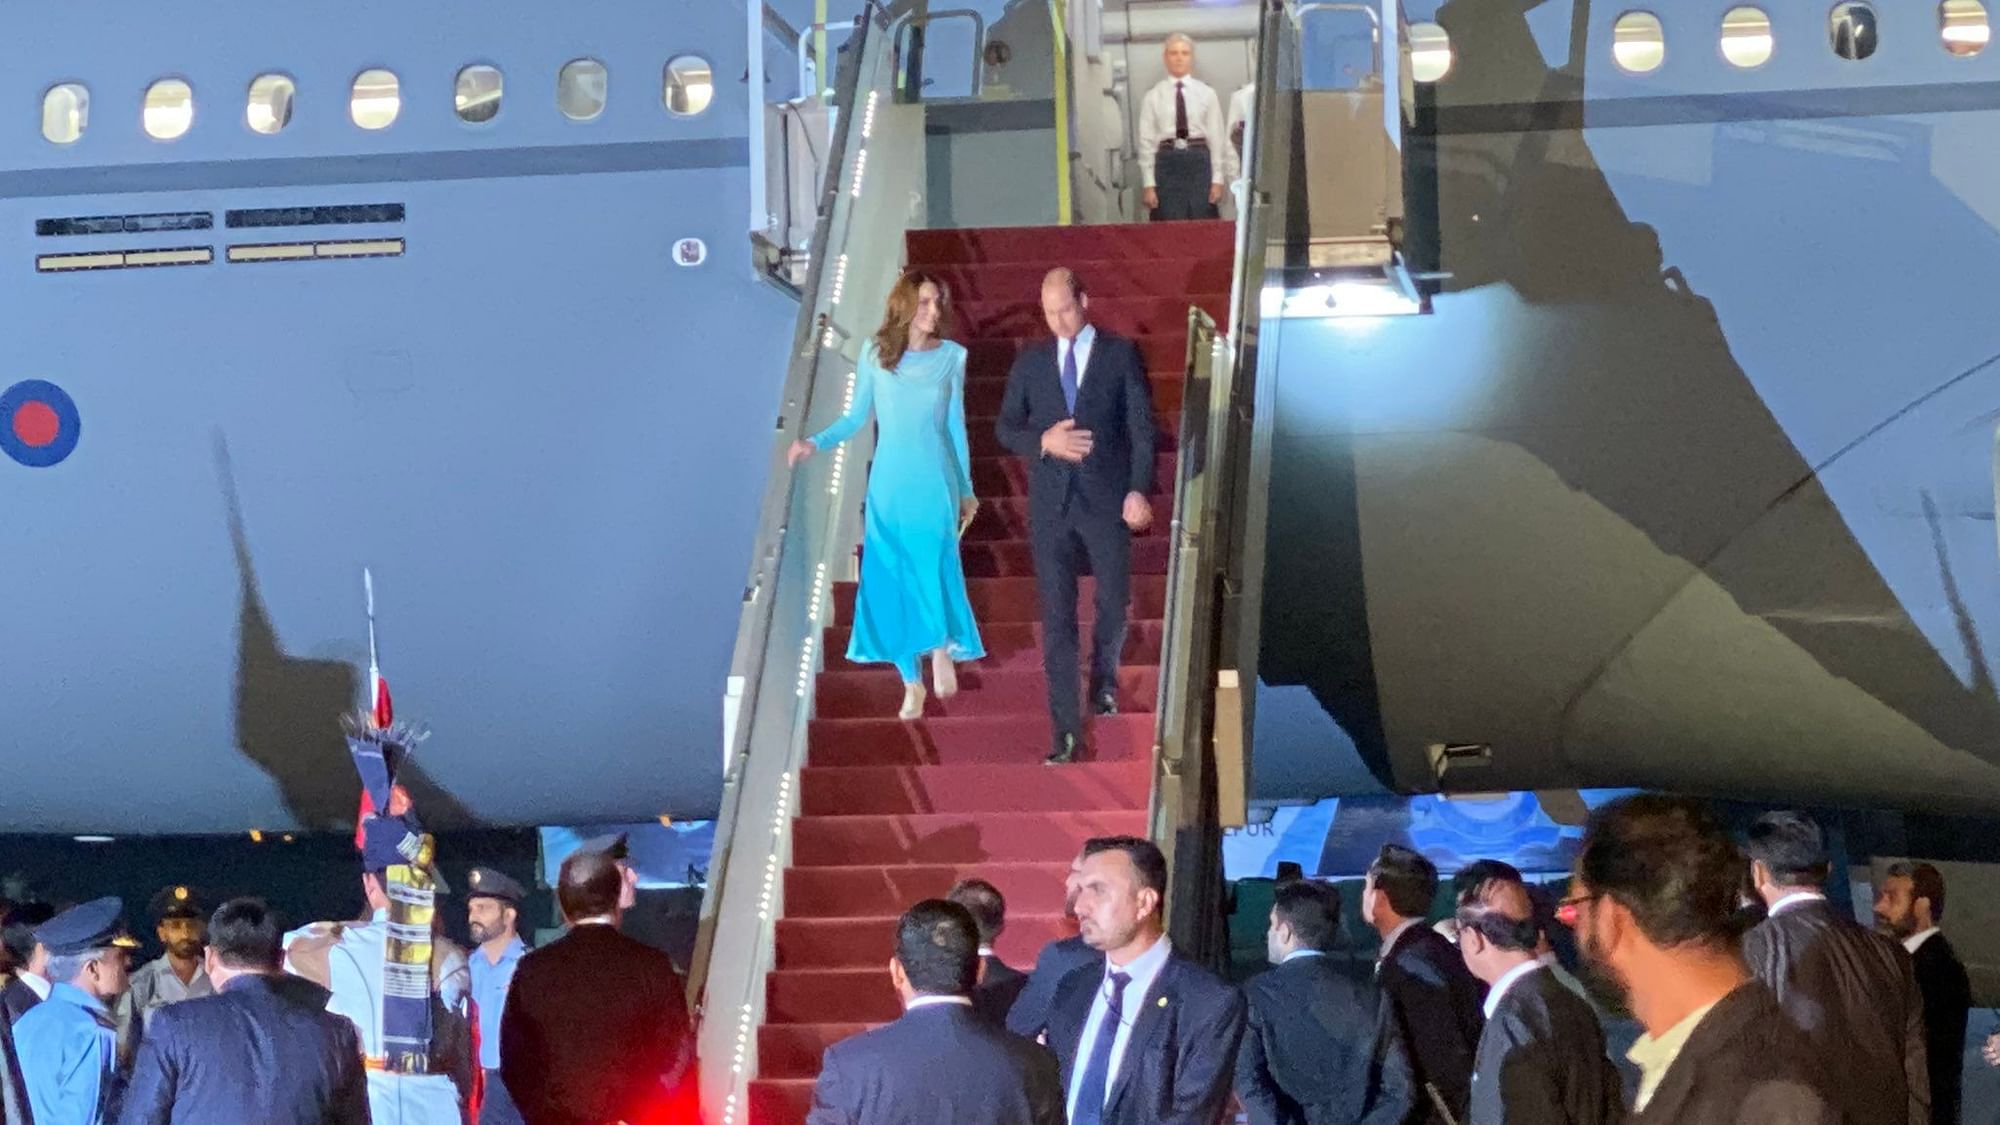 Prince William and Kate Middleton landed in Pakistan late evening on Monday, 14 October, kicking off their four-day official visit to the country.